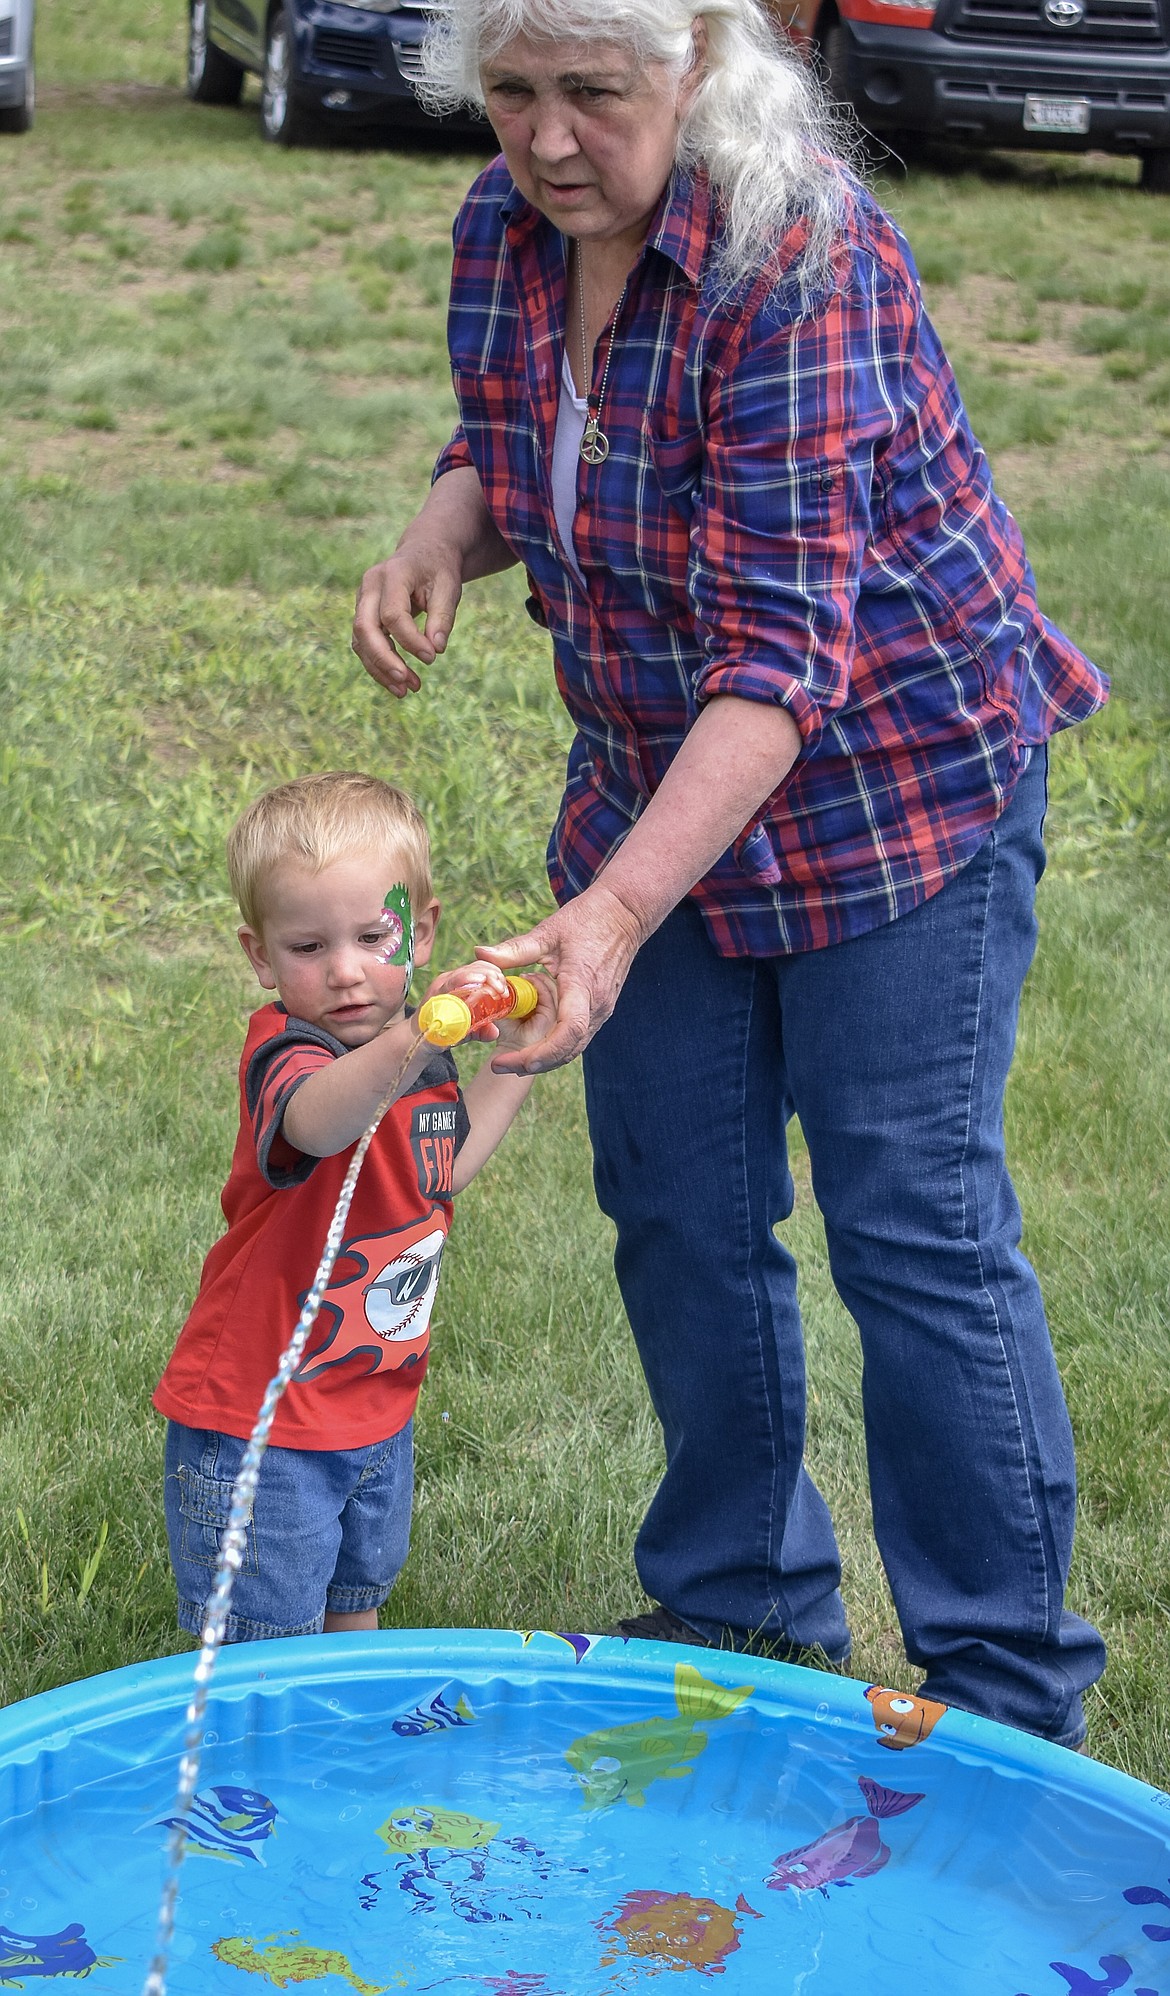 Community volunteer Bonnie Surrell helps Laramy Allen get a handle on a water squirter used for one of the childrens&#146; games during the sixth annual Yaak School Arts and Crafts Fair Saturday, June 30. 
(Ben Kibbey/The Western News)